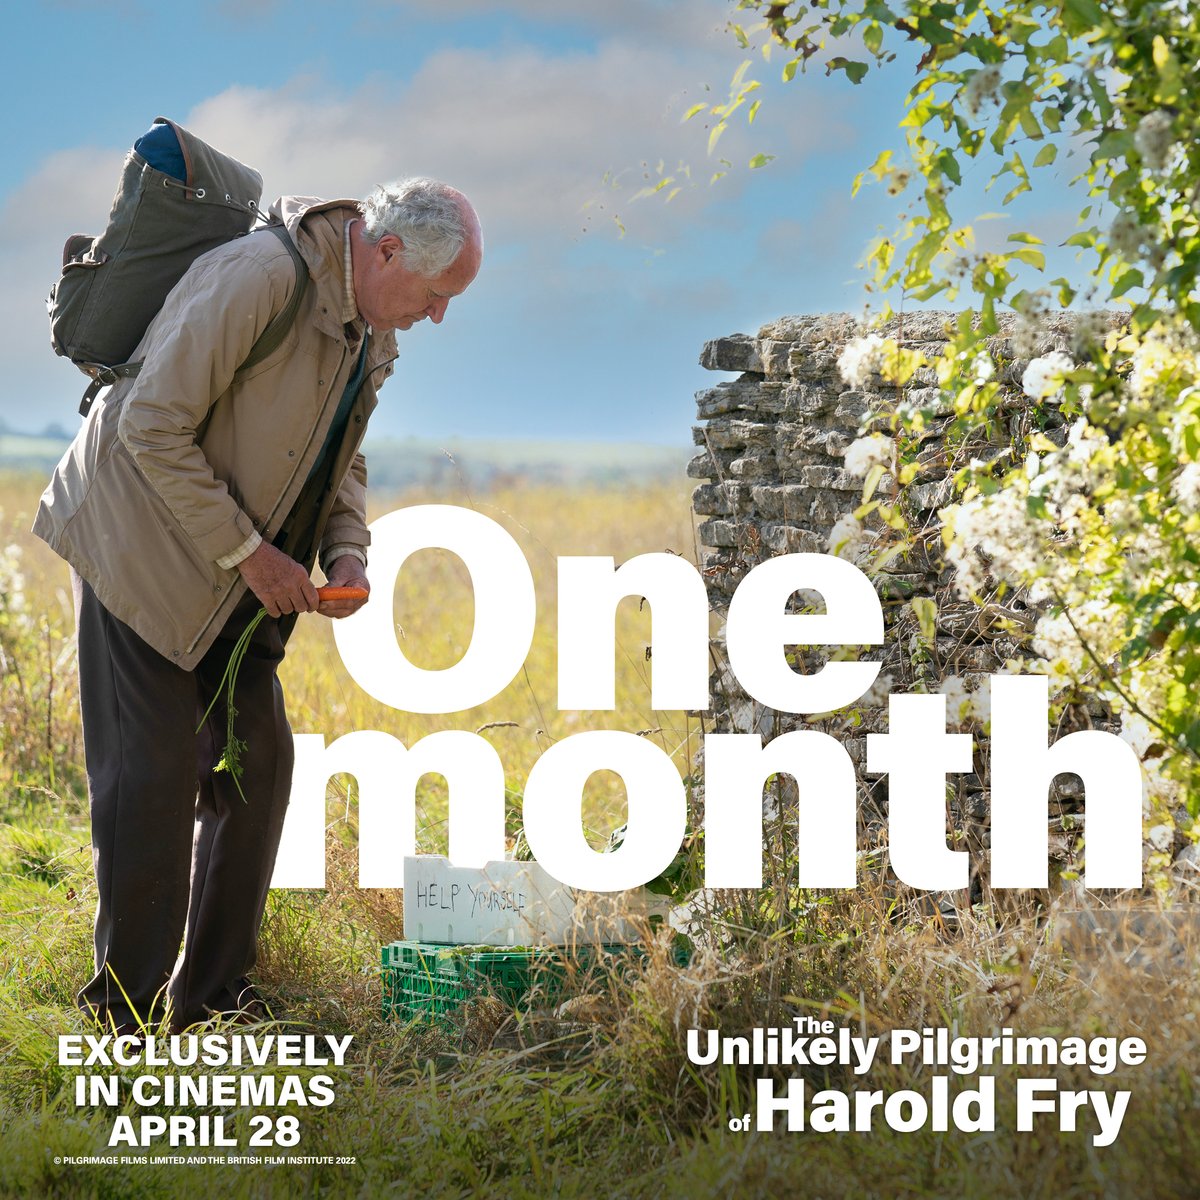 ONE MONTH... until Harold starts his pilgrimage. Join him exclusively in cinemas April 28th.